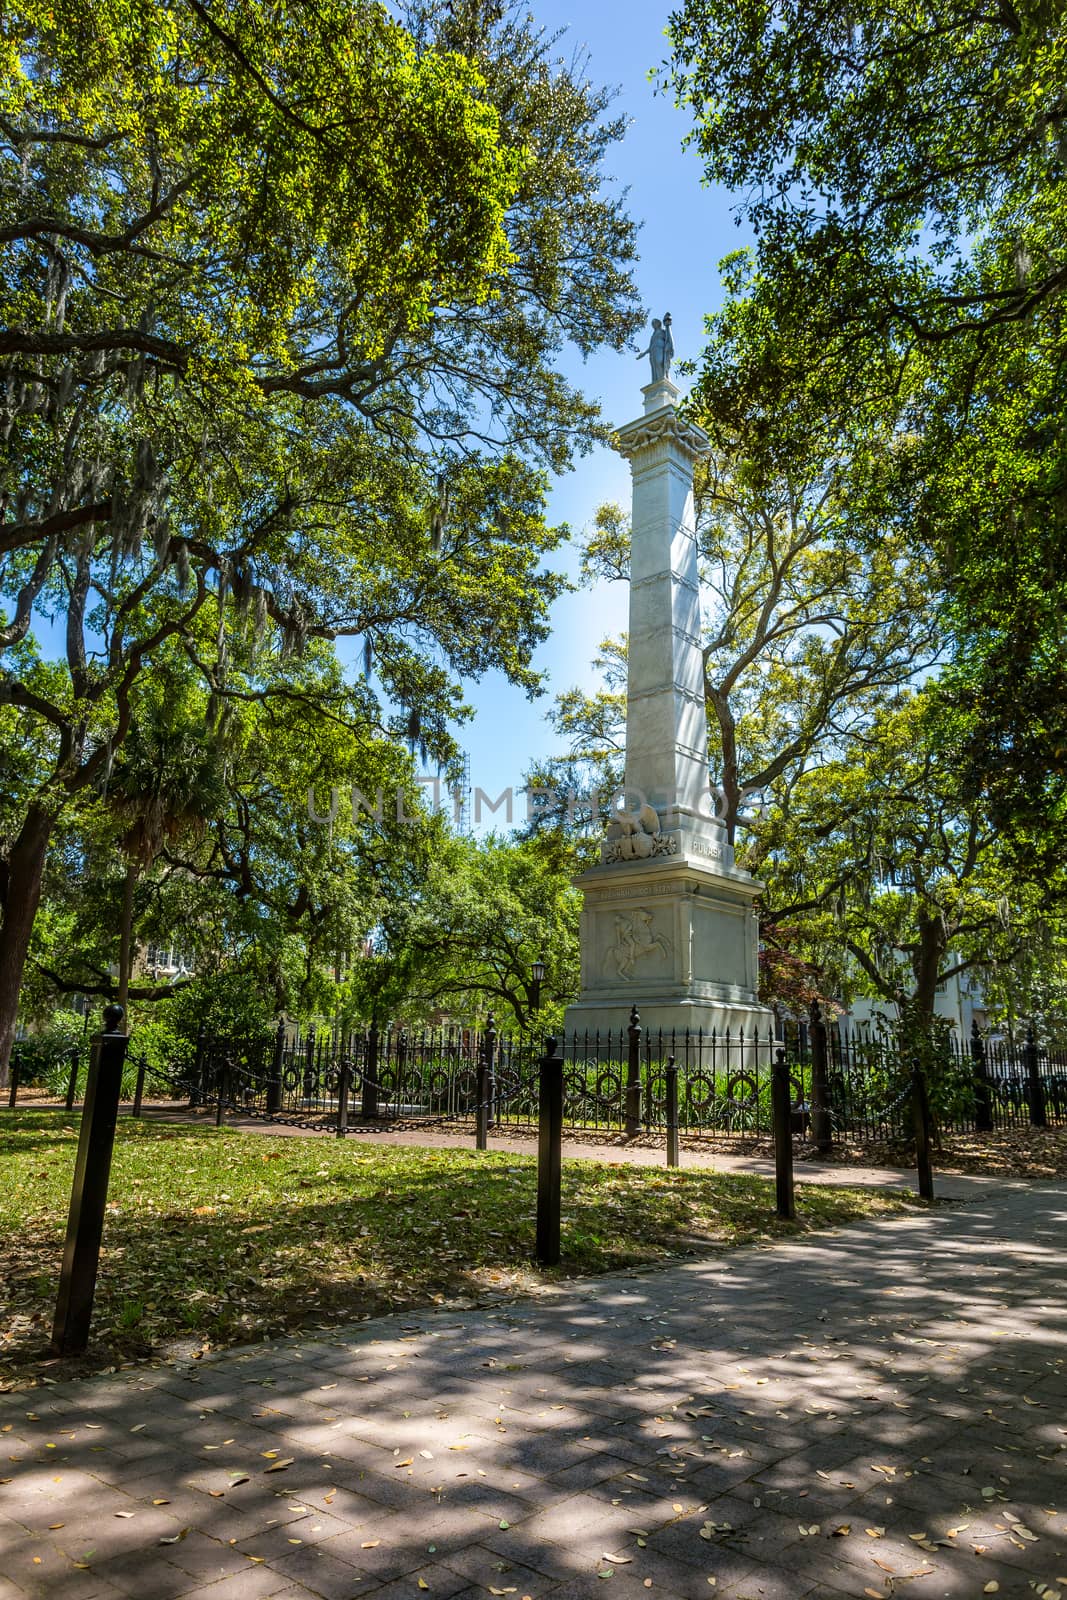 The Casimir Pulaski Monument is the focal point of Monterey Square in Savannah, Georgia.